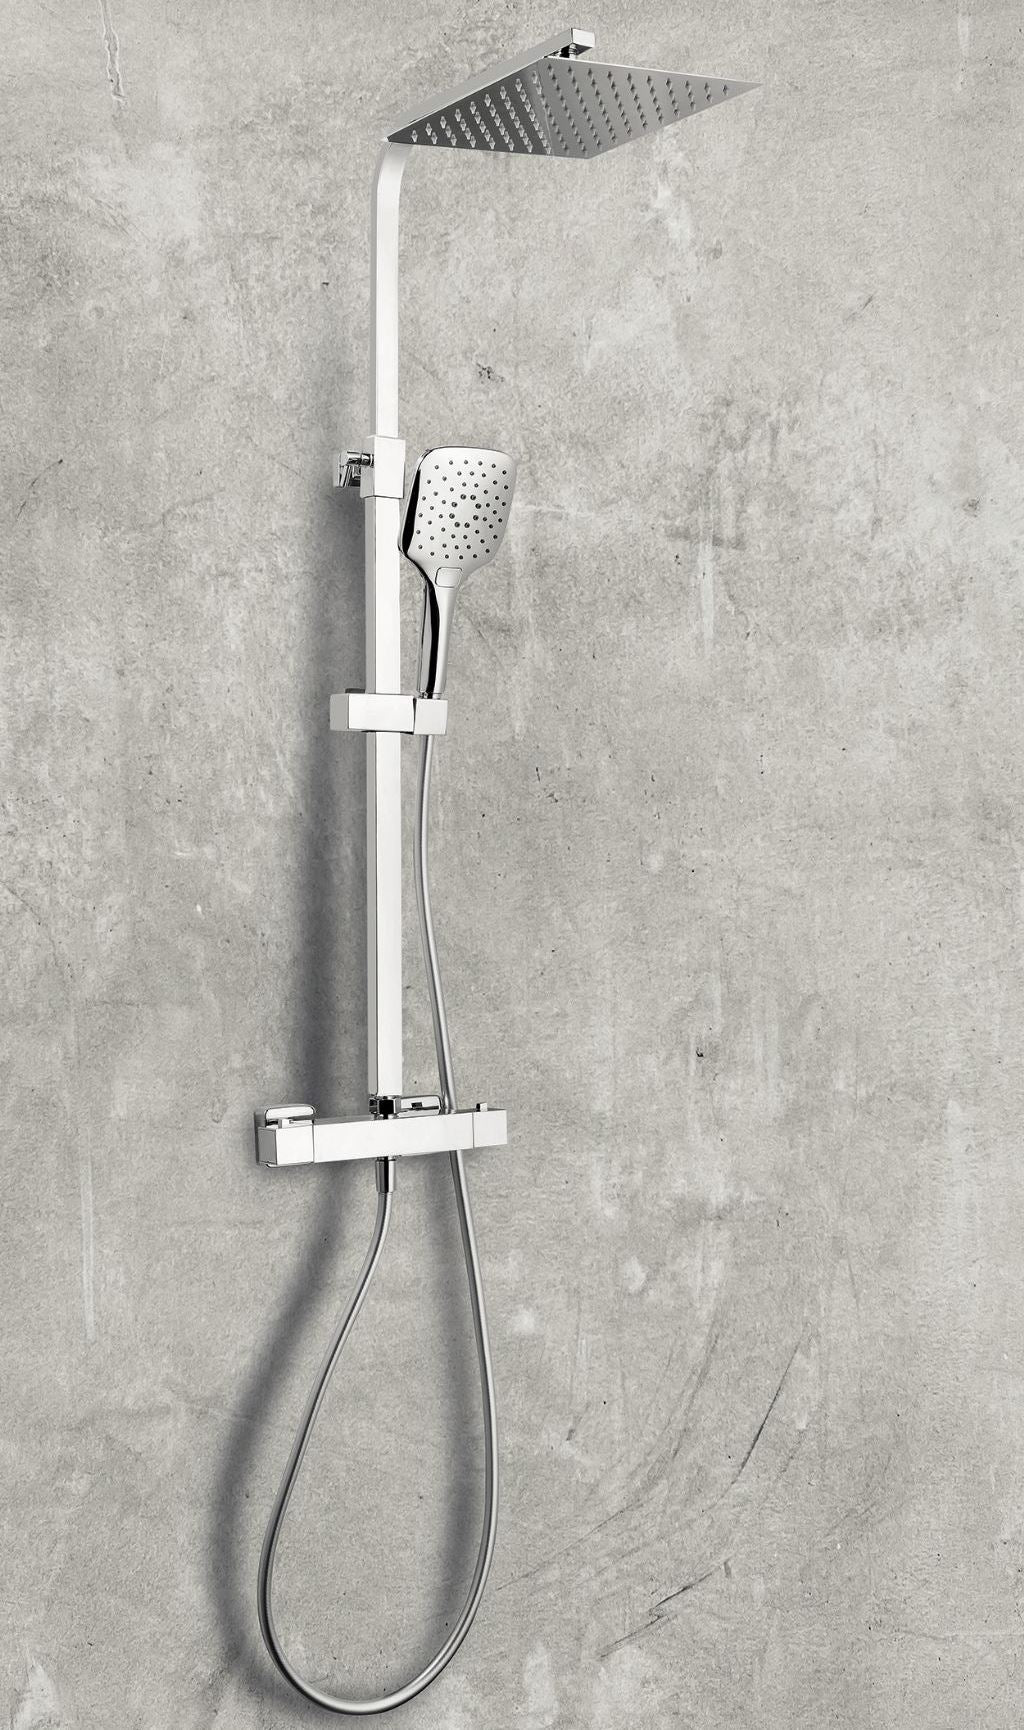 Helier Cool Touch Rigid Riser Shower